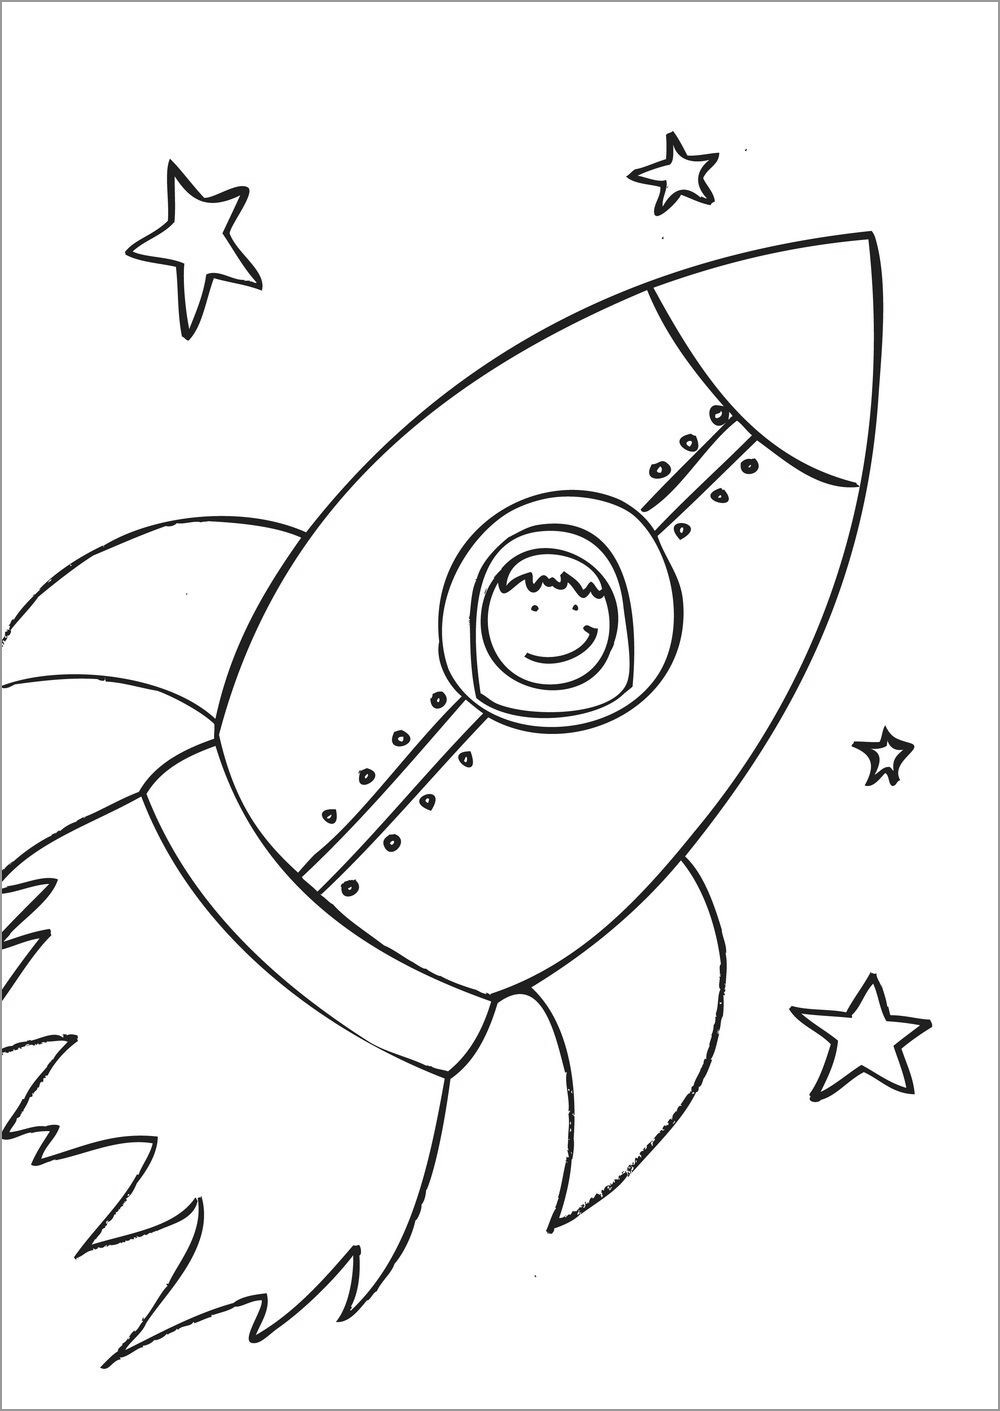 Astronaut and Rocket Coloring Page